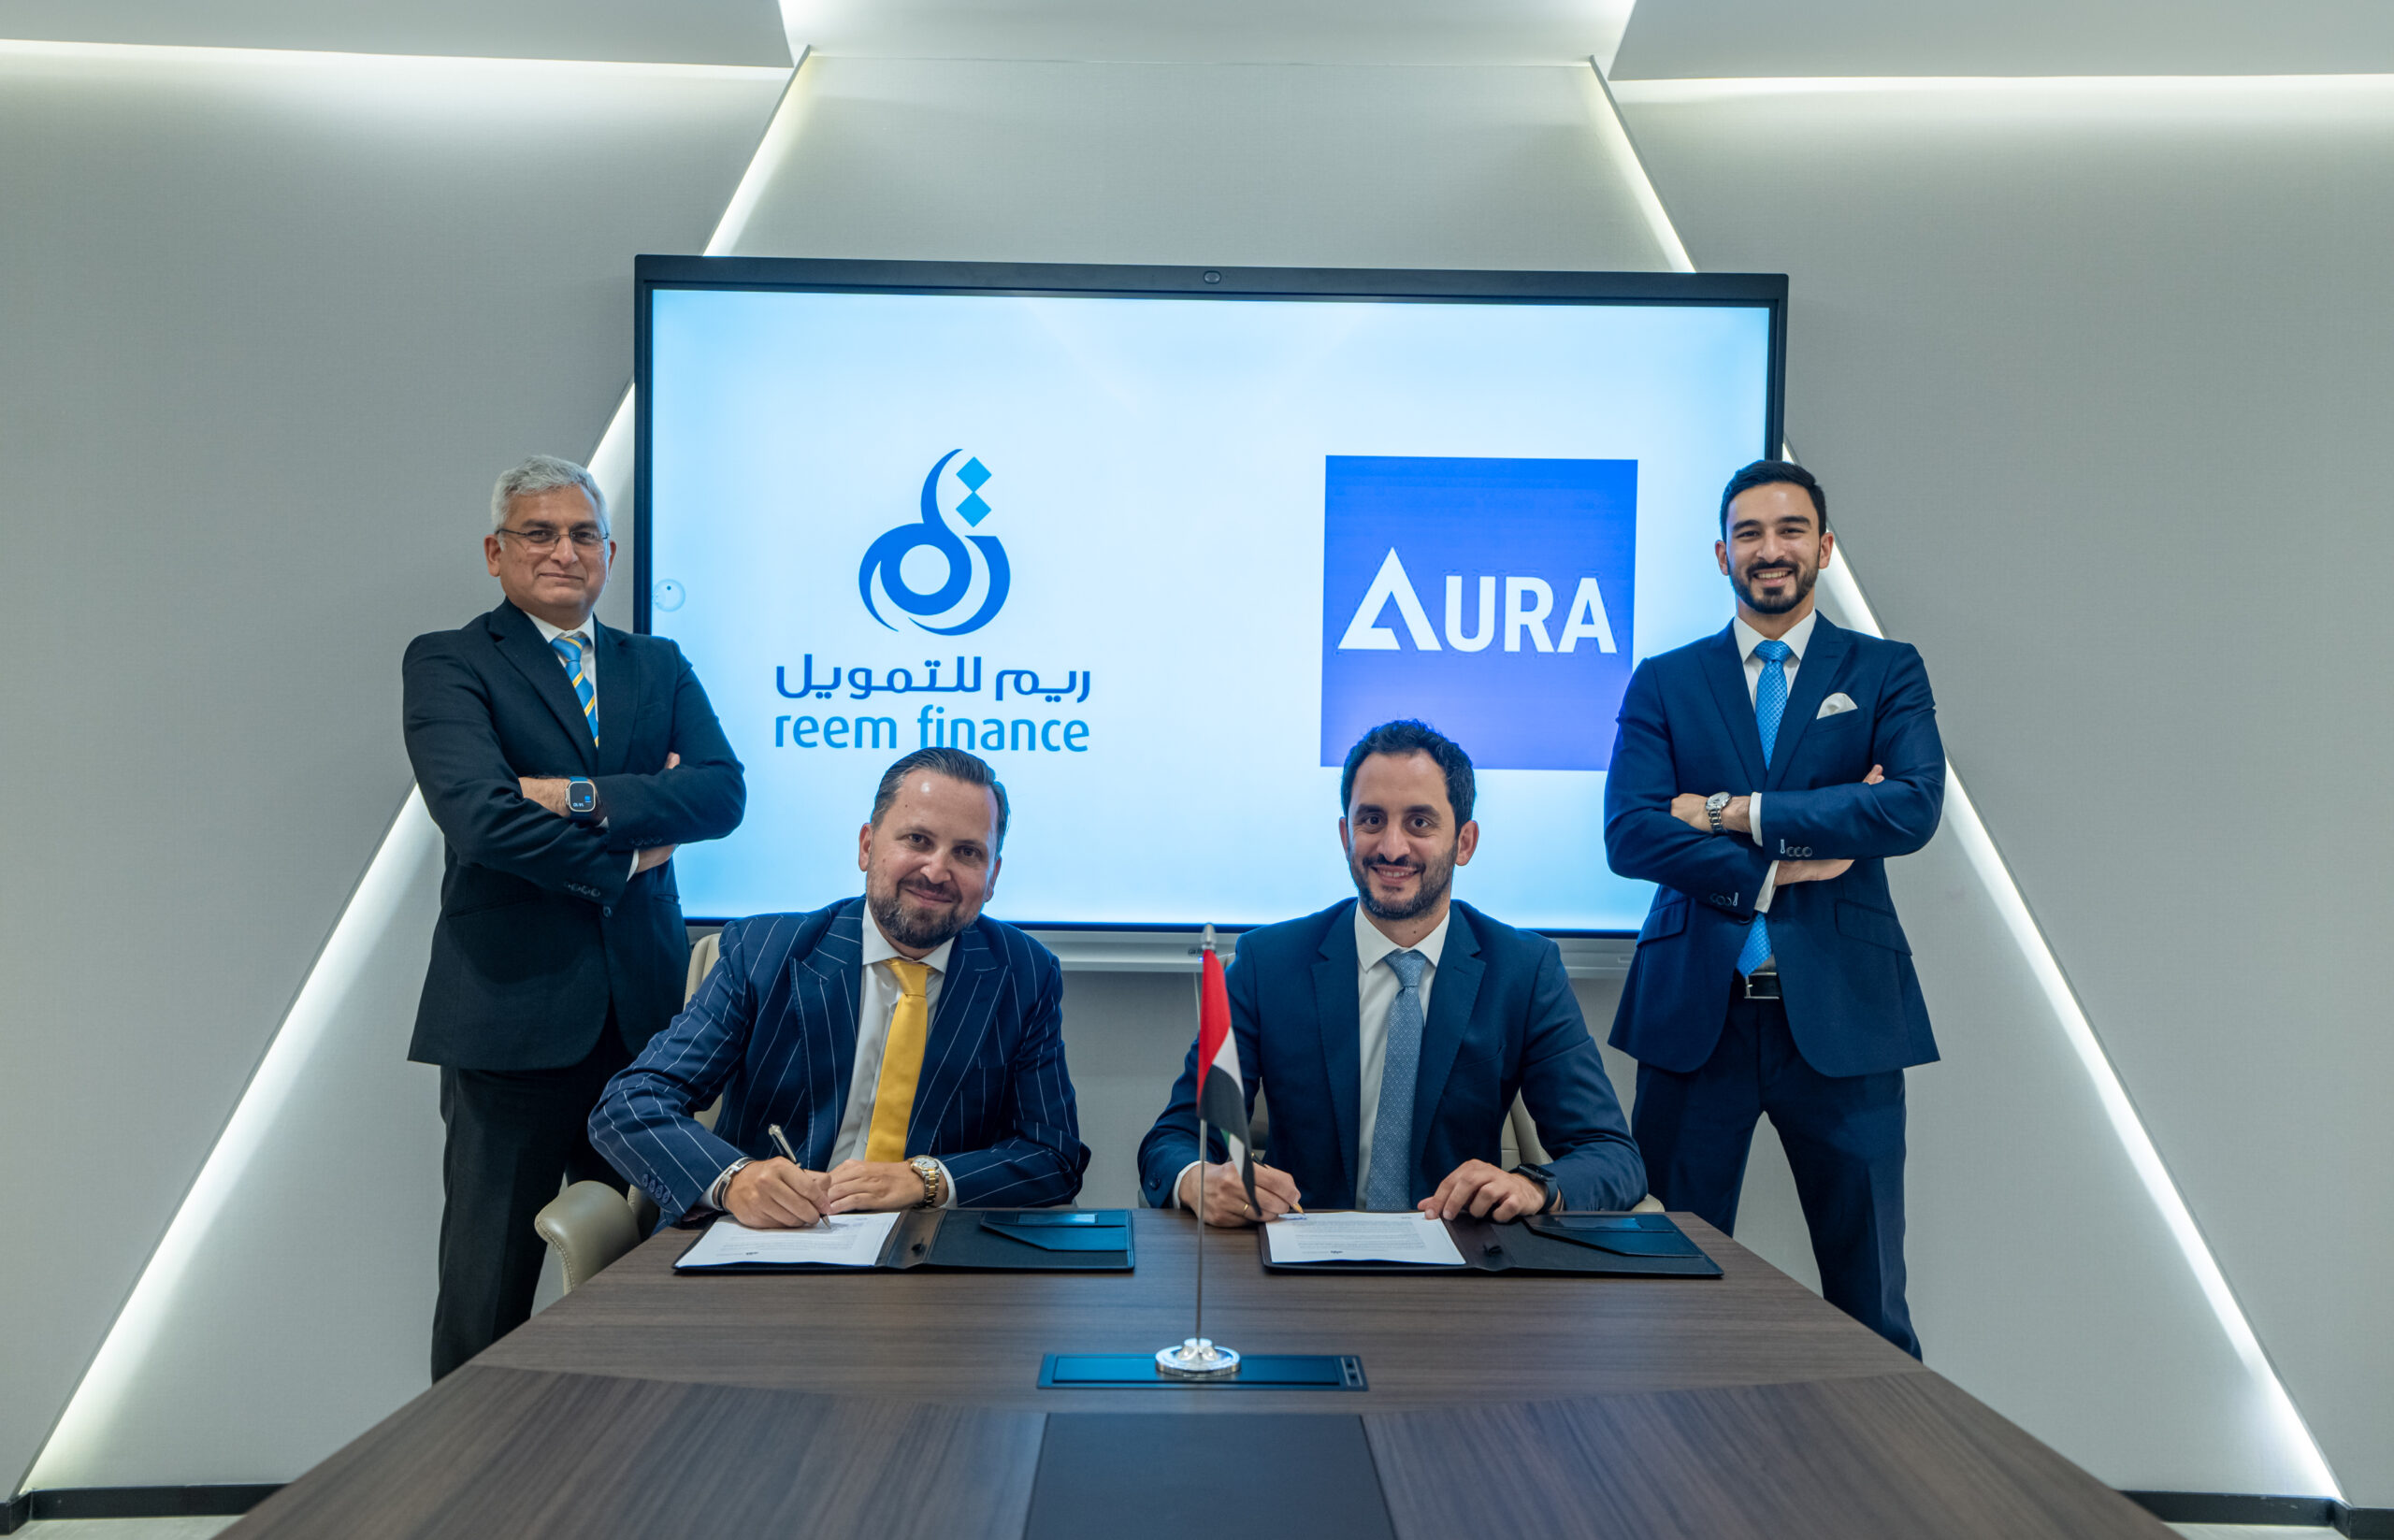 UAE fintech Aura partners with Reem Finance to improve SME cash flow through innovative credit products